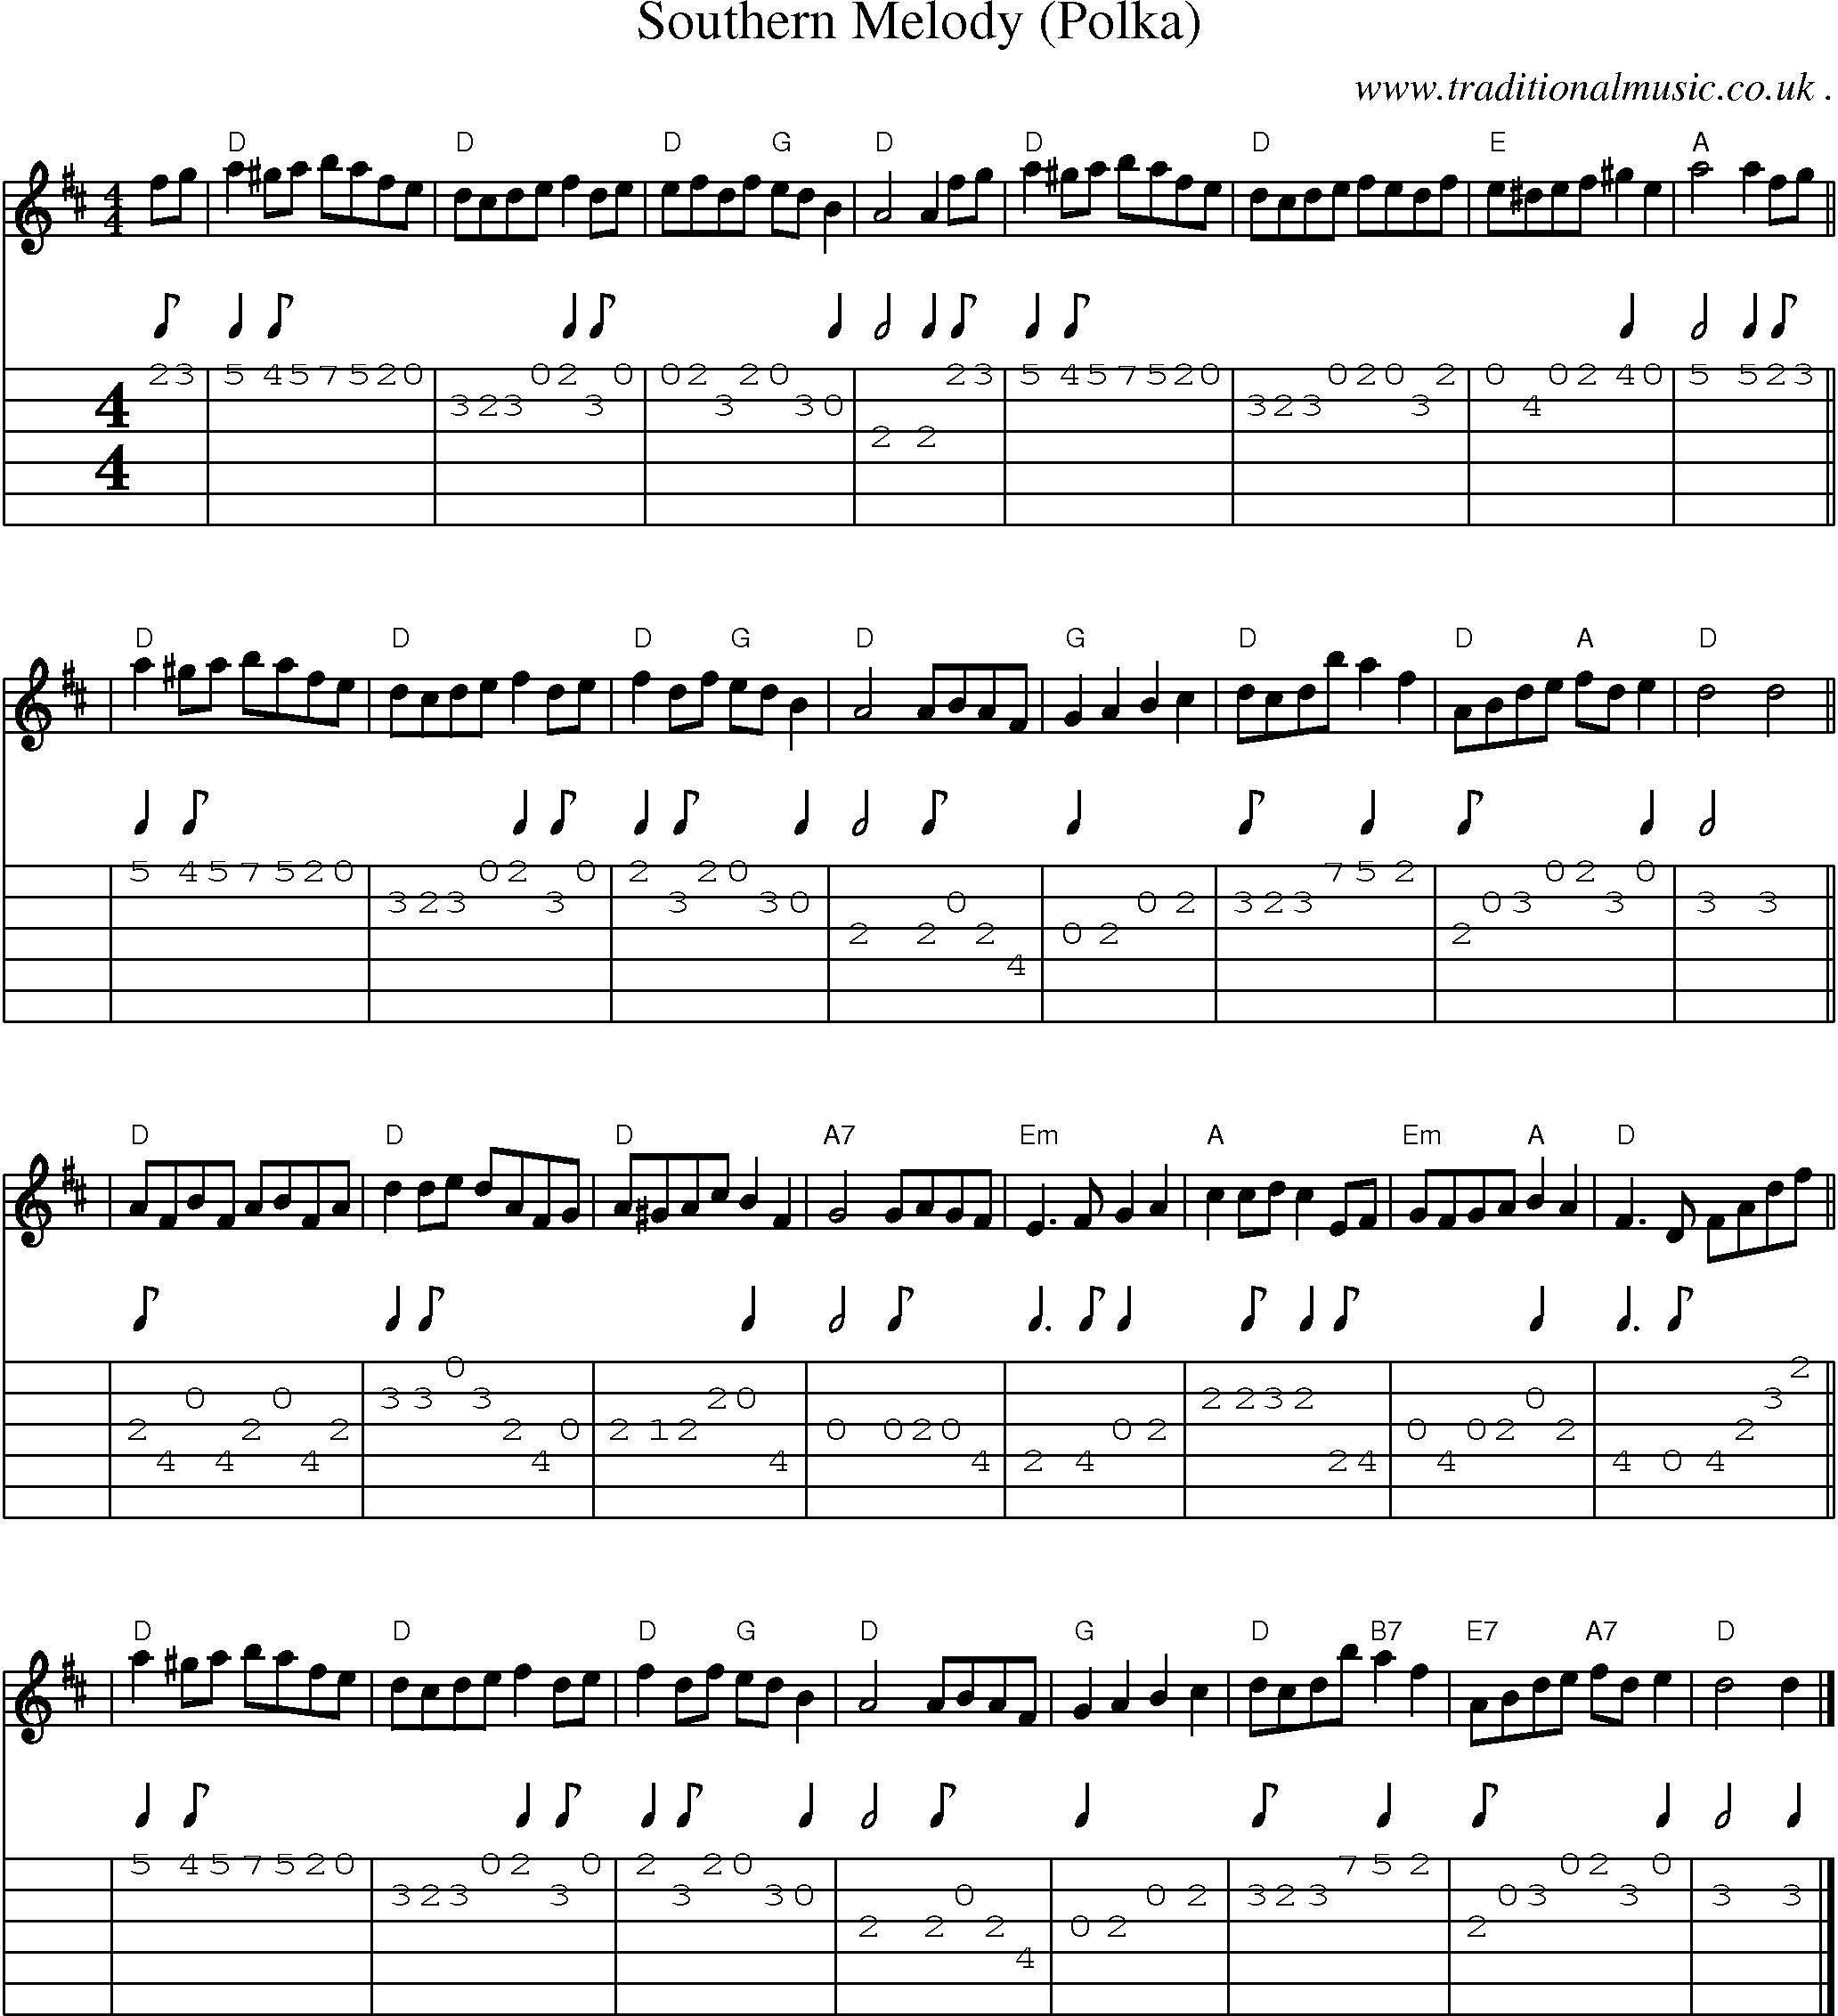 Sheet-music  score, Chords and Guitar Tabs for Southern Melody Polka